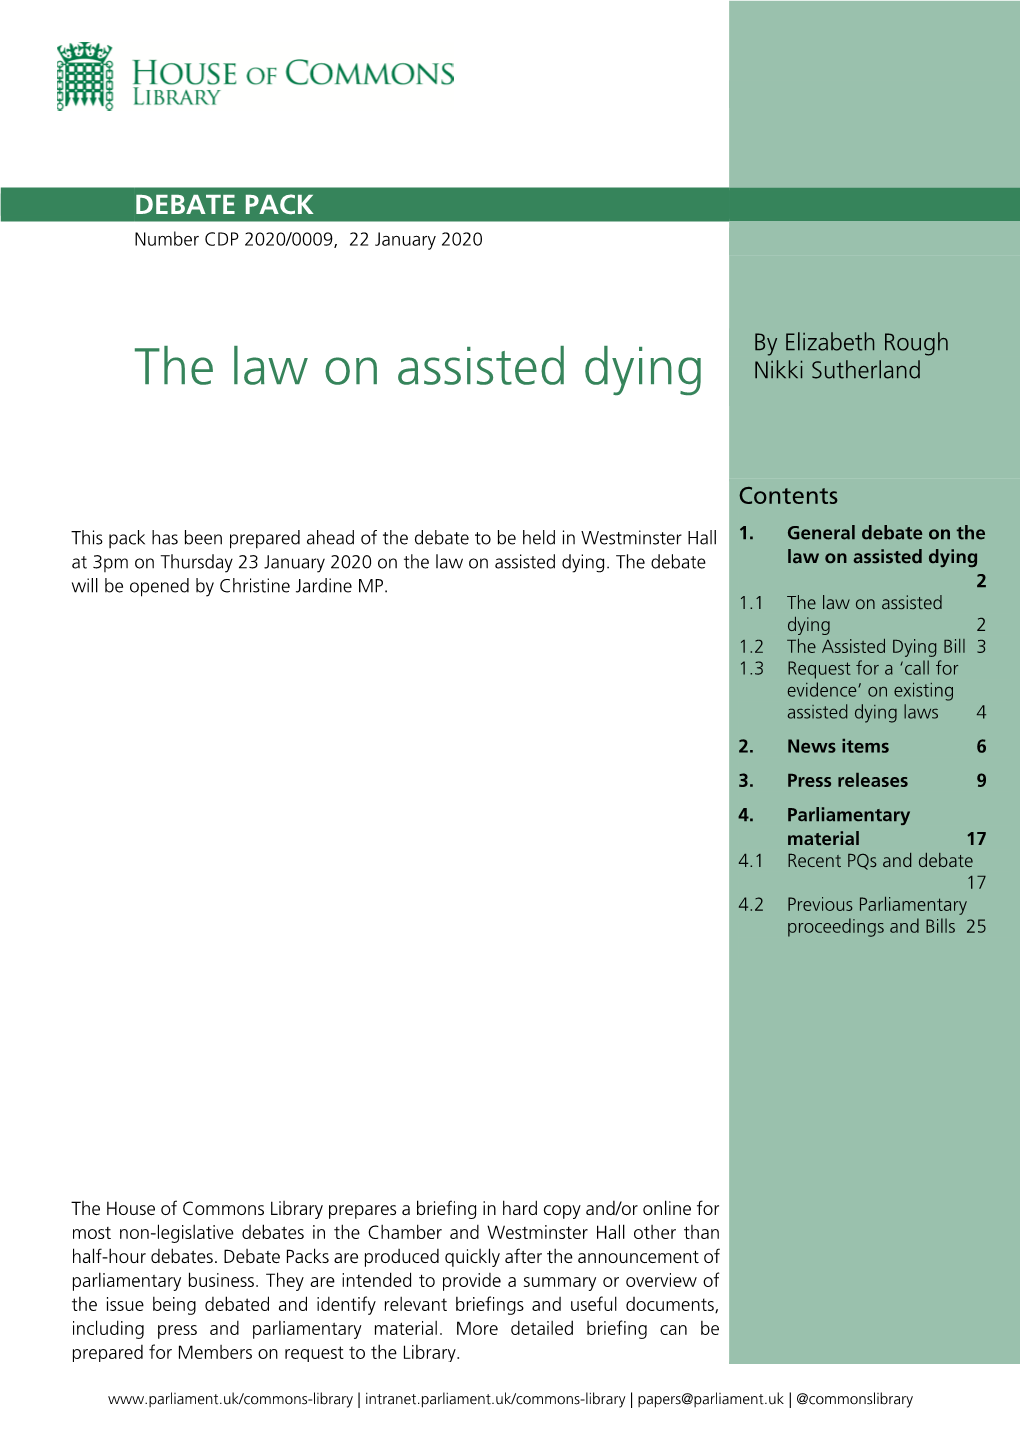 The Law on Assisted Dying